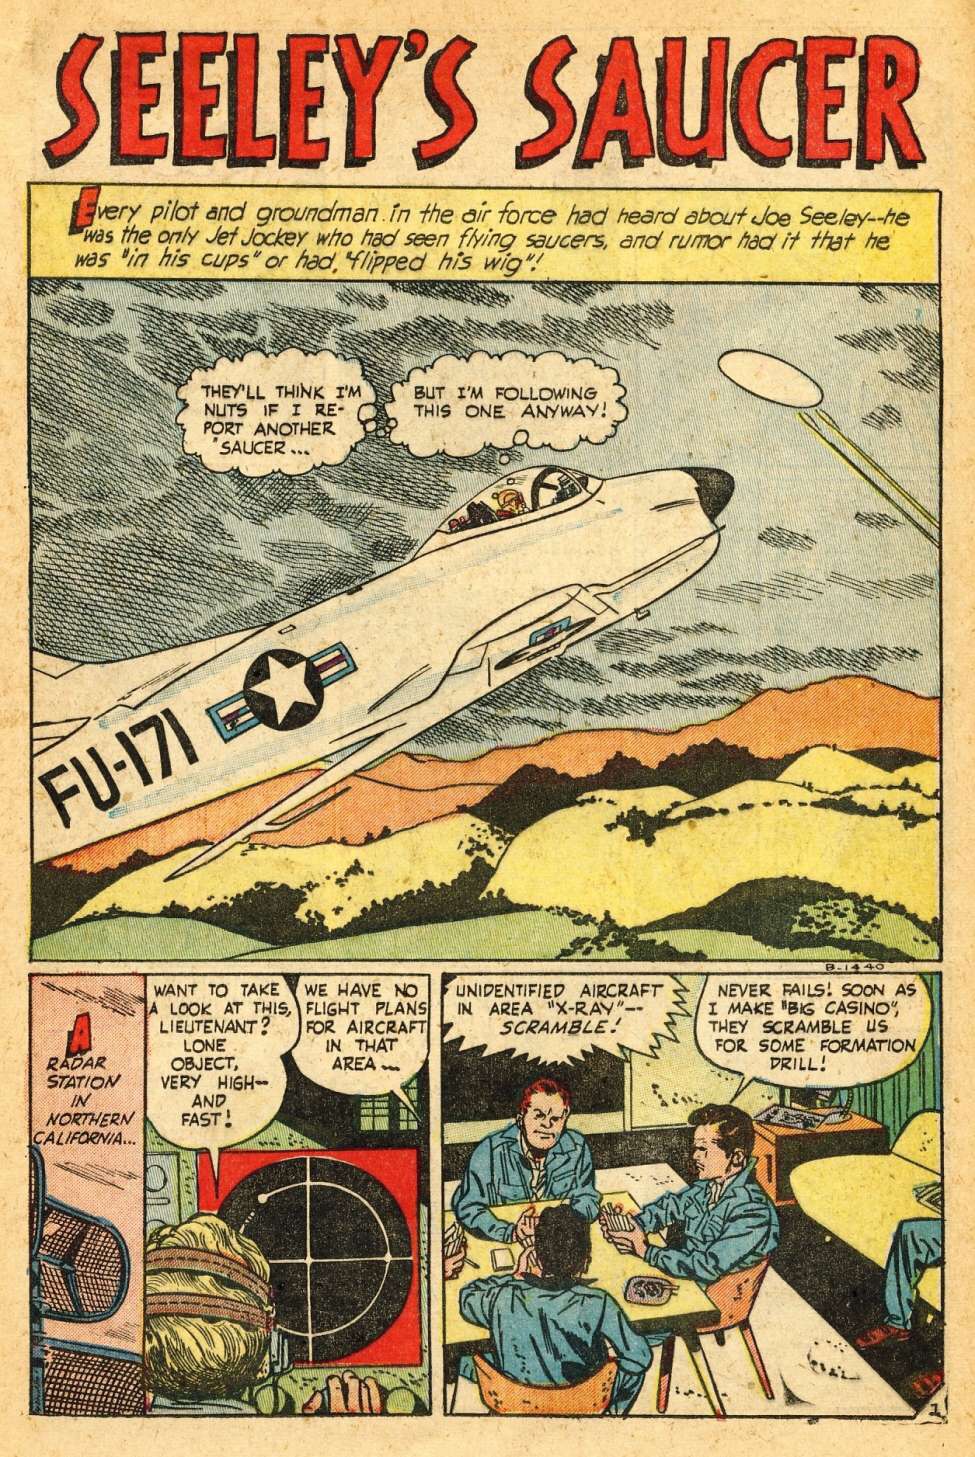 “Seeley’s Saucer” from Jet Fighters #7, art by Alex Toth